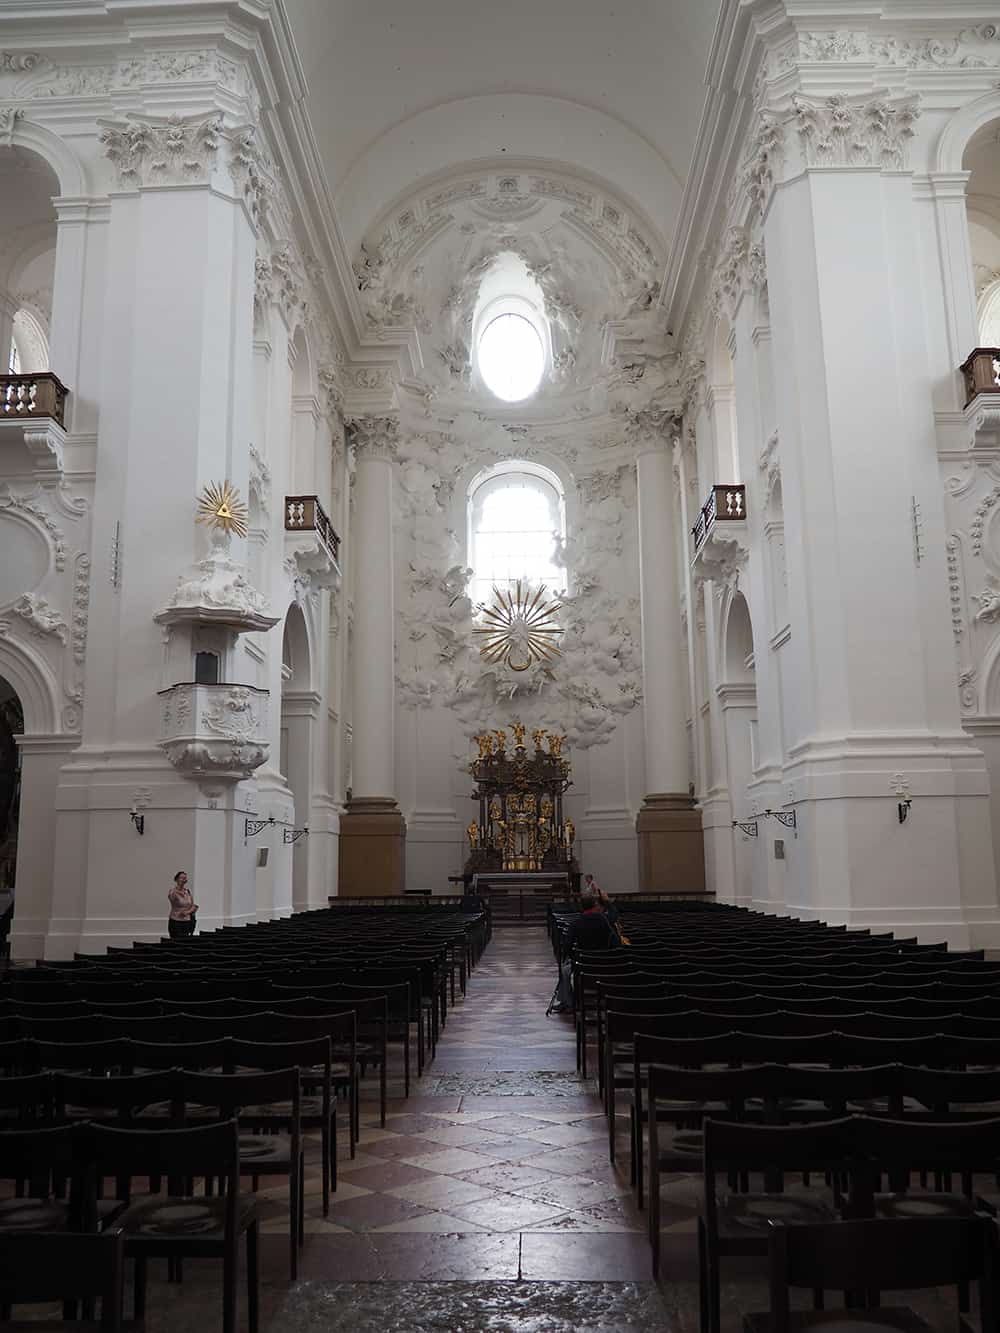 The Kollegienkirche means "college church" and is the church for the University of Salzburg.  It is built in a Baroque style that later became the model of German baroque churches.  This church is a part of UNESCO World Heritage site for Salzburg's historic center. | via Autumn All Along